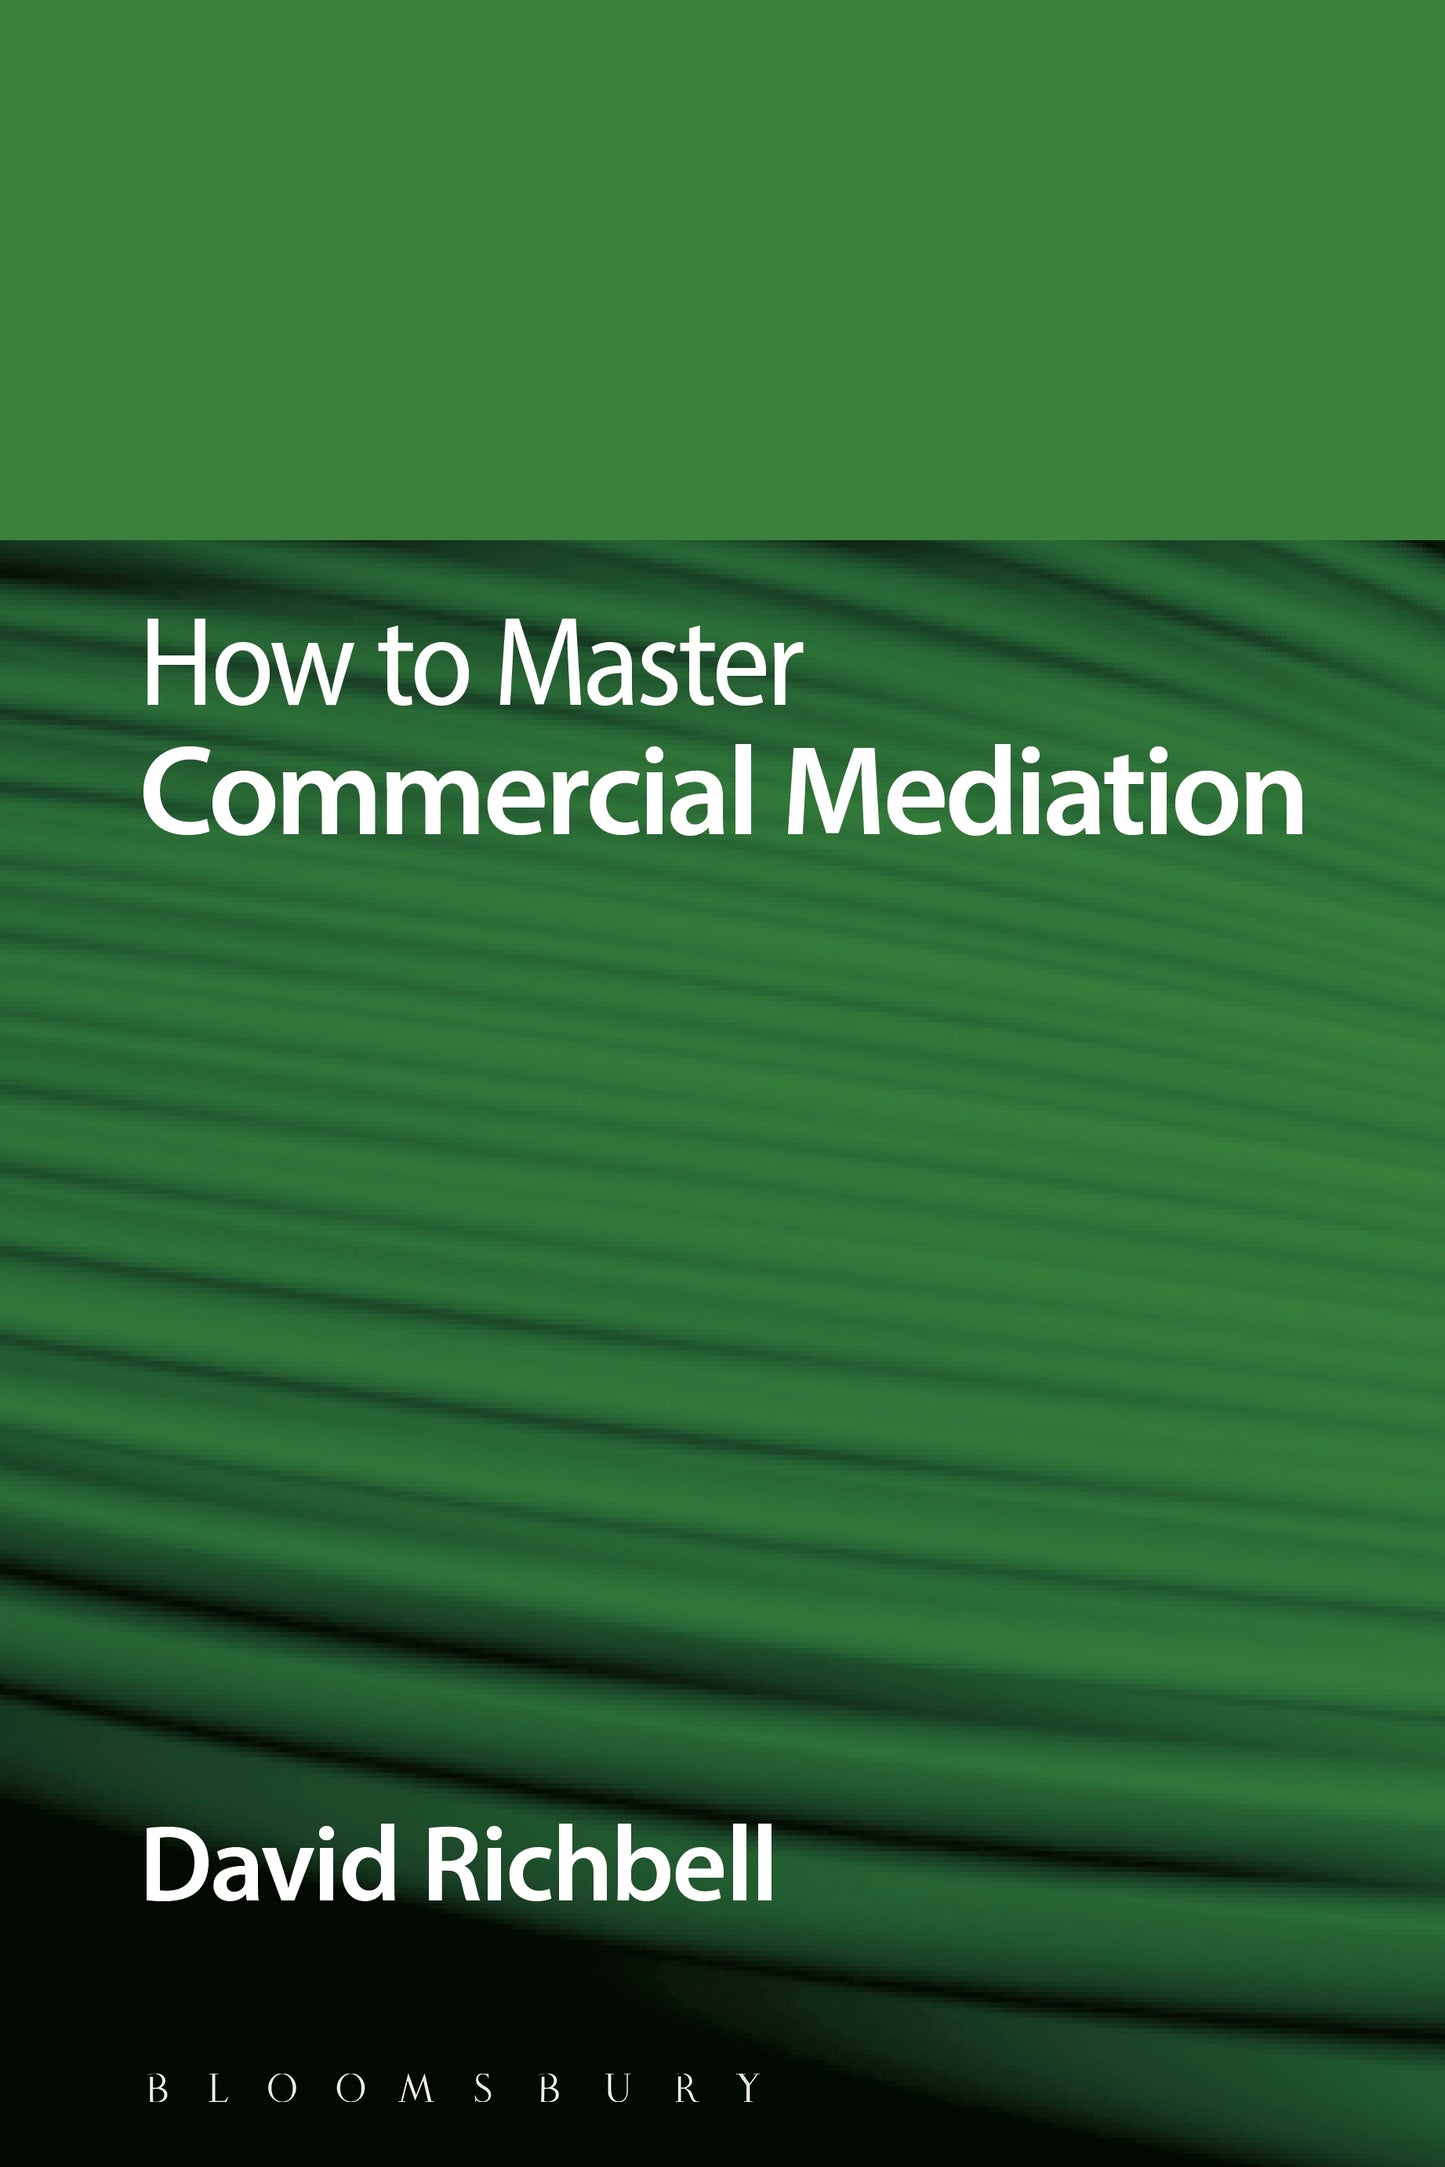 How to Master Commercial Mediation